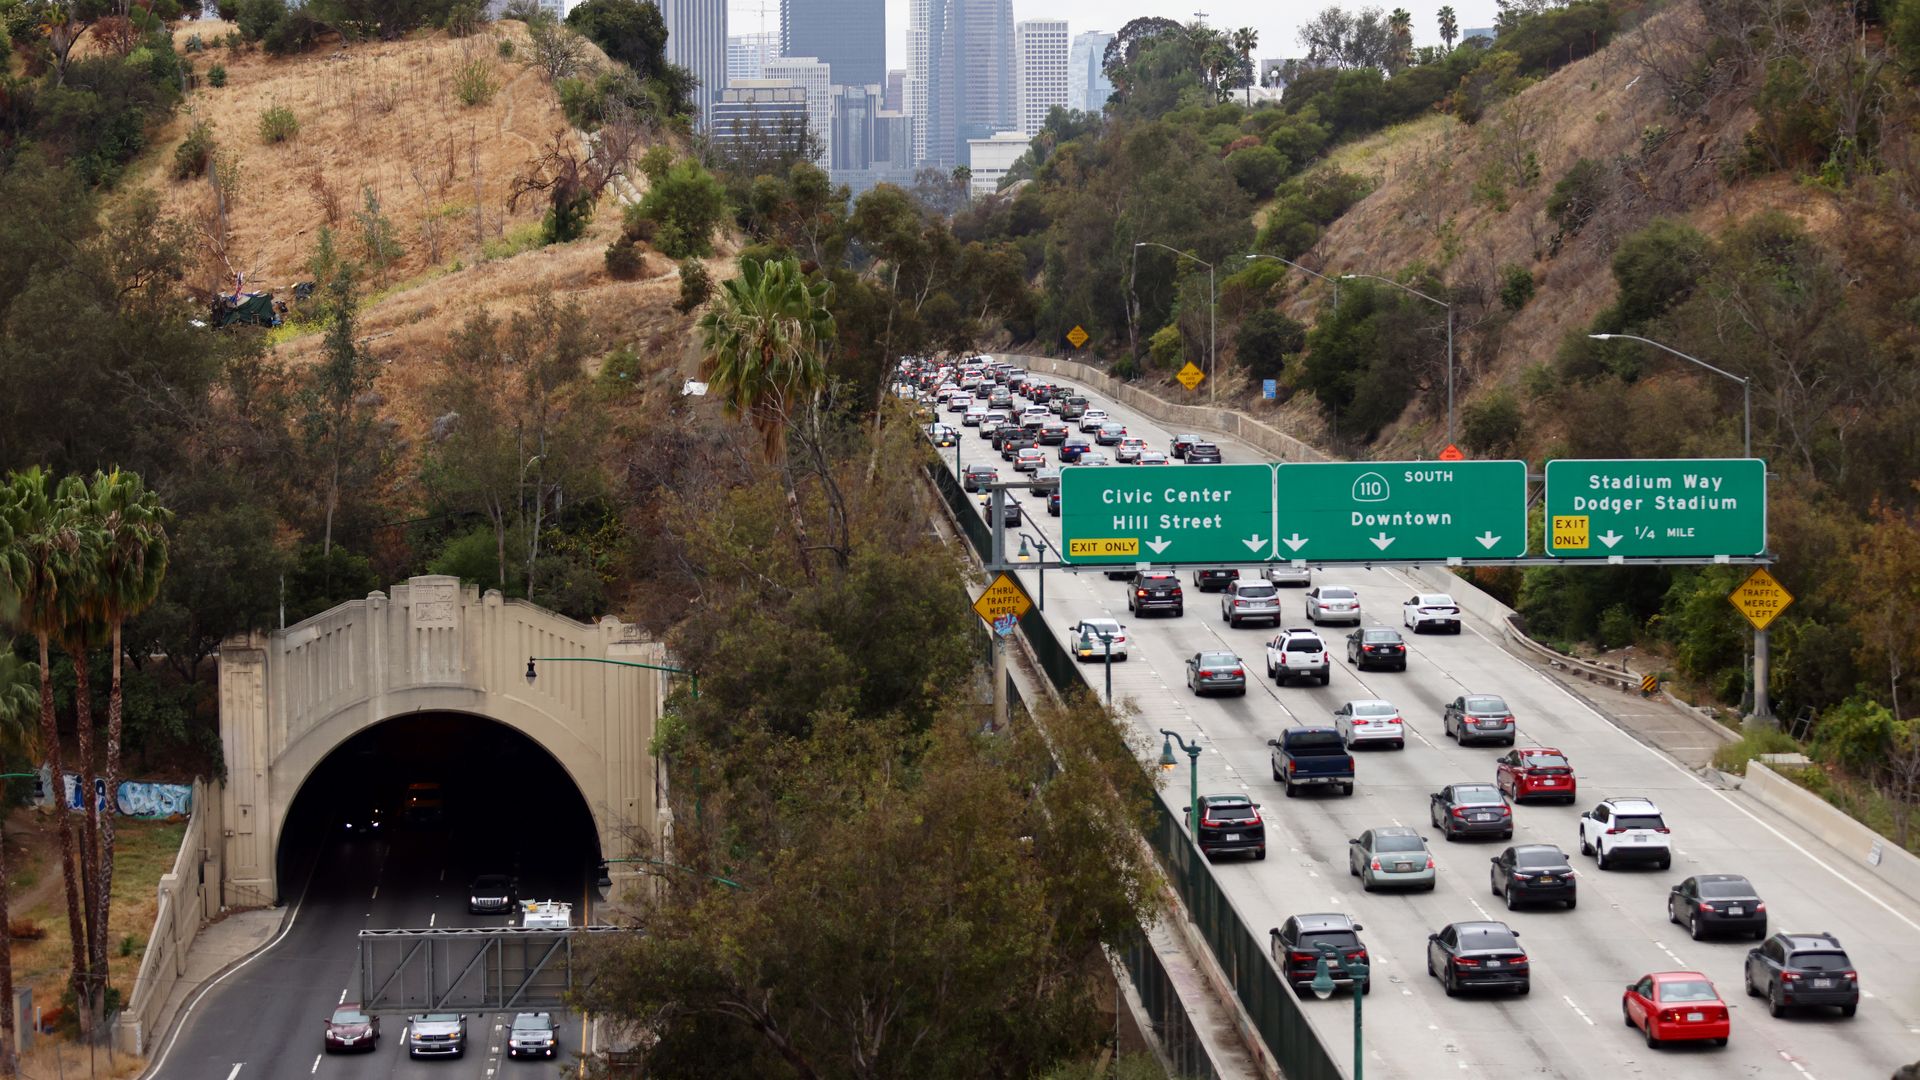 Cars make their way toward downtown L.A. during the morning commute on April 22, 2021 in Los Angeles